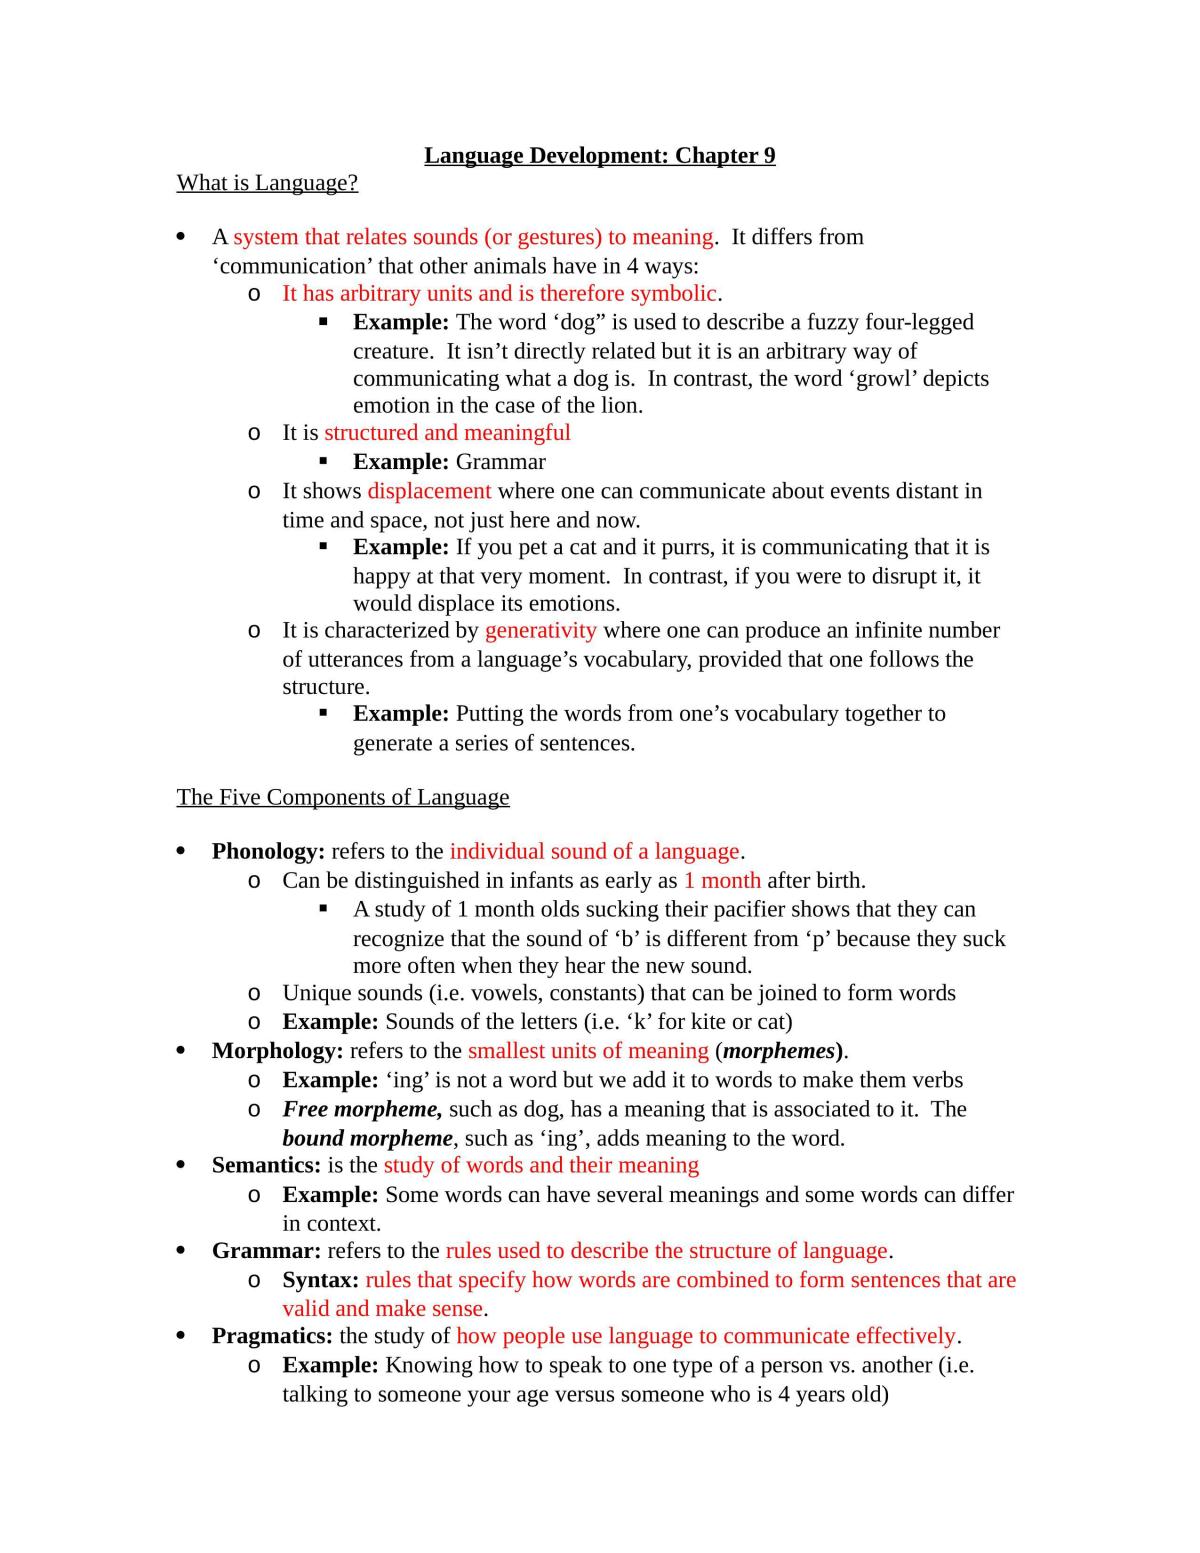 Complete Study Notes - PYSCH 2AA3 - Page 1